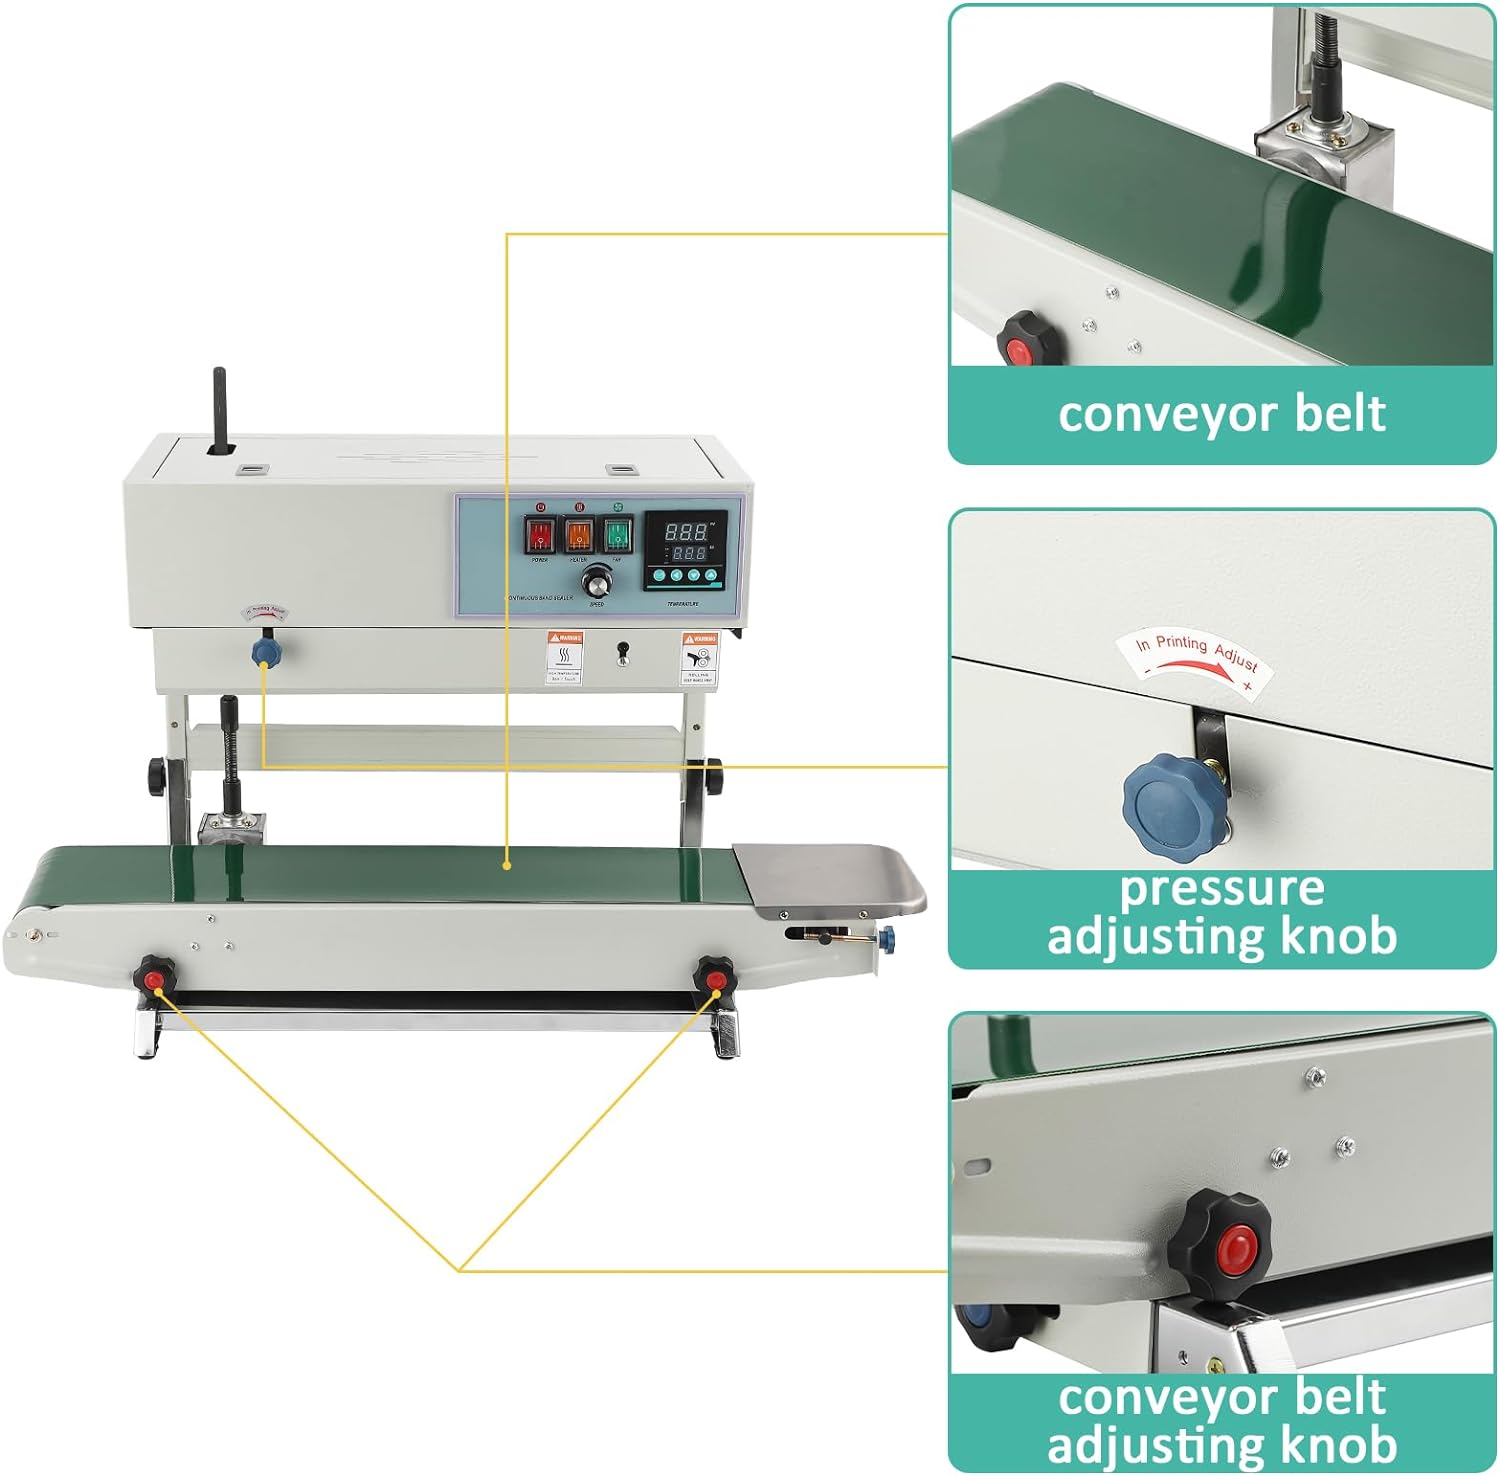 Band Sealer, Vertical Continuous Band Sealer FR-900, Automatic Continuous Sealing Machine with Digital Temperature Control, Commercial PP Aluminum Foil PVC Plastic Bag Band Sealing Machine